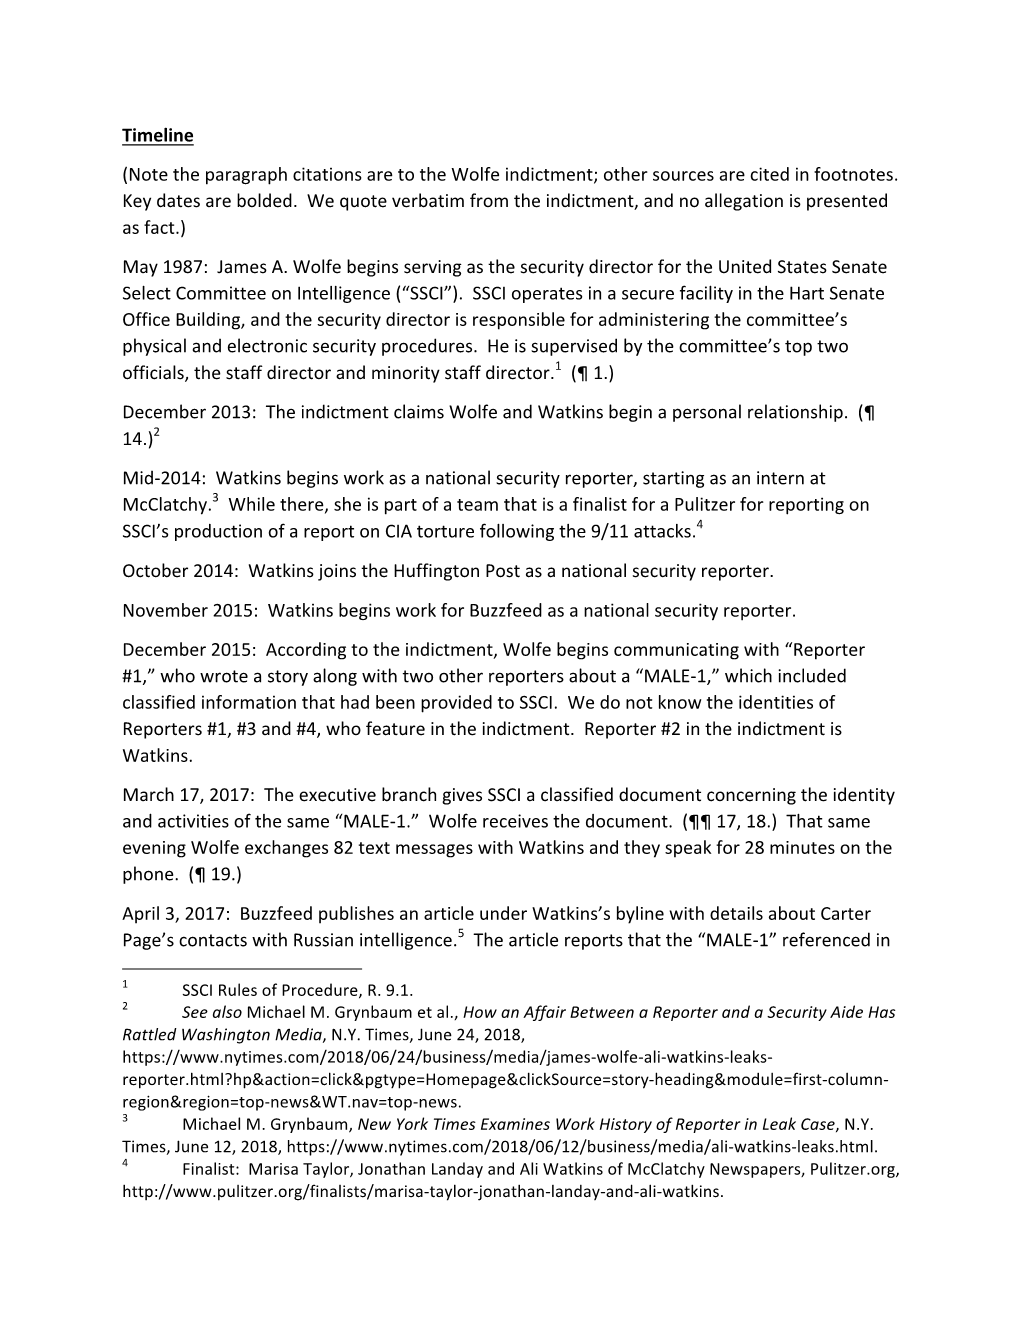 Timeline (Note the Paragraph Citations Are to the Wolfe Indictment; Other Sources Are Cited in Footnotes